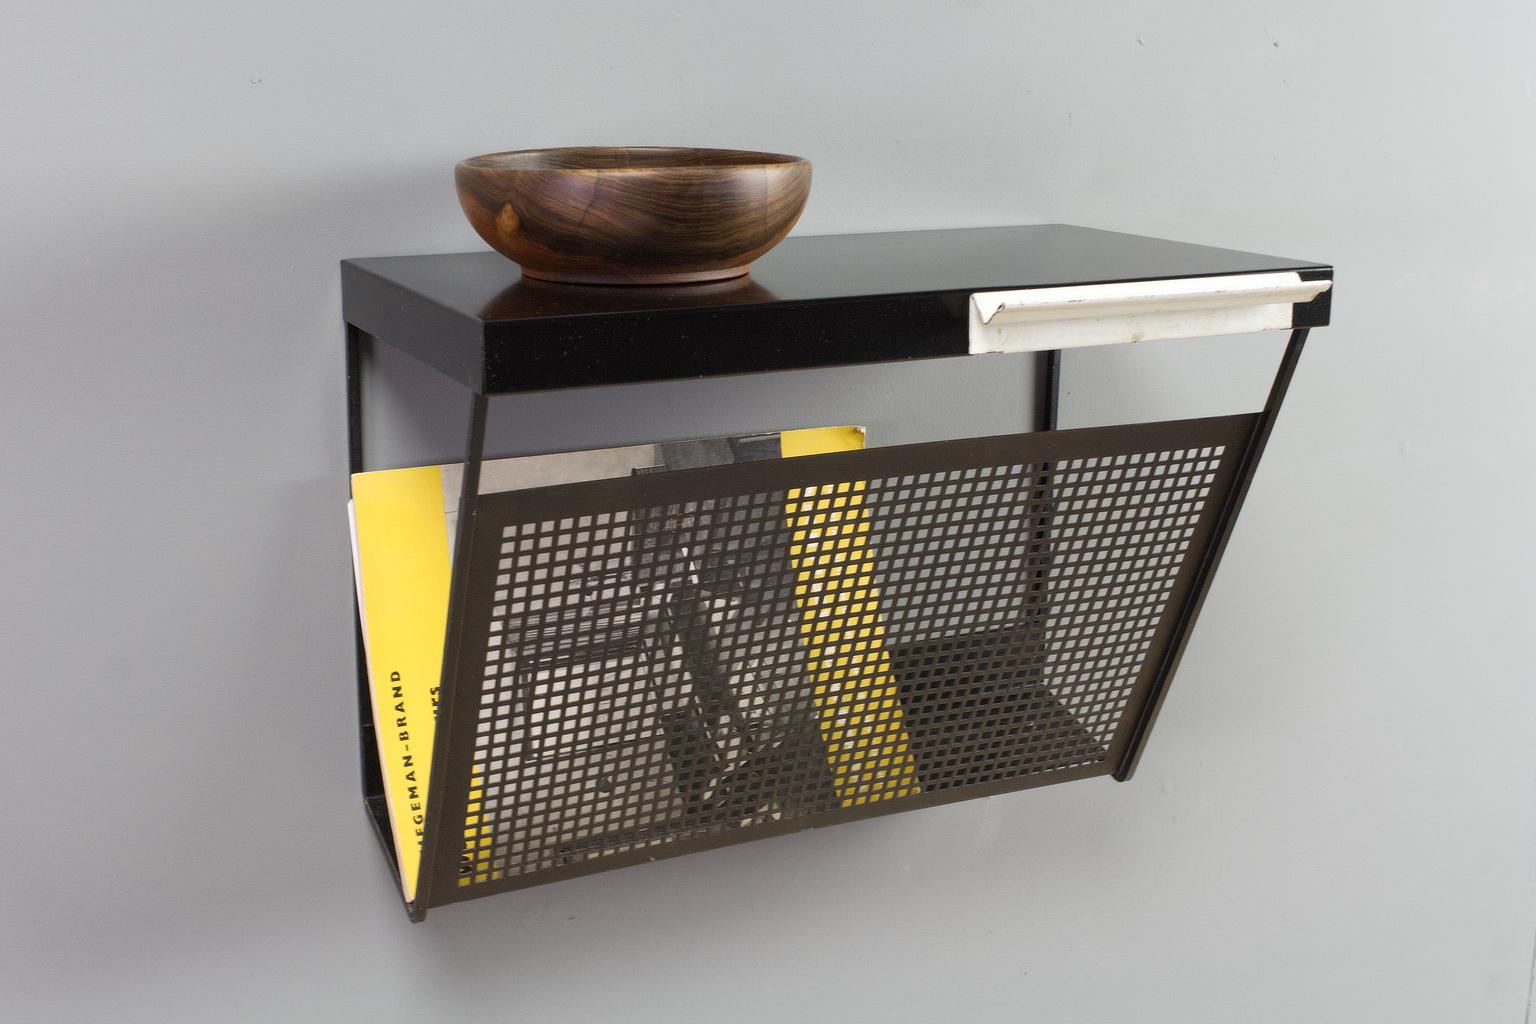 Midcentury Dutch Vintage metal magazine rack in black and white, designed by Tjerk Reijenga for Pilastro, 1960s. The black wall mounted storage rack has a perforated storage compartment for magazines, letters or other post, a small drawer for keys